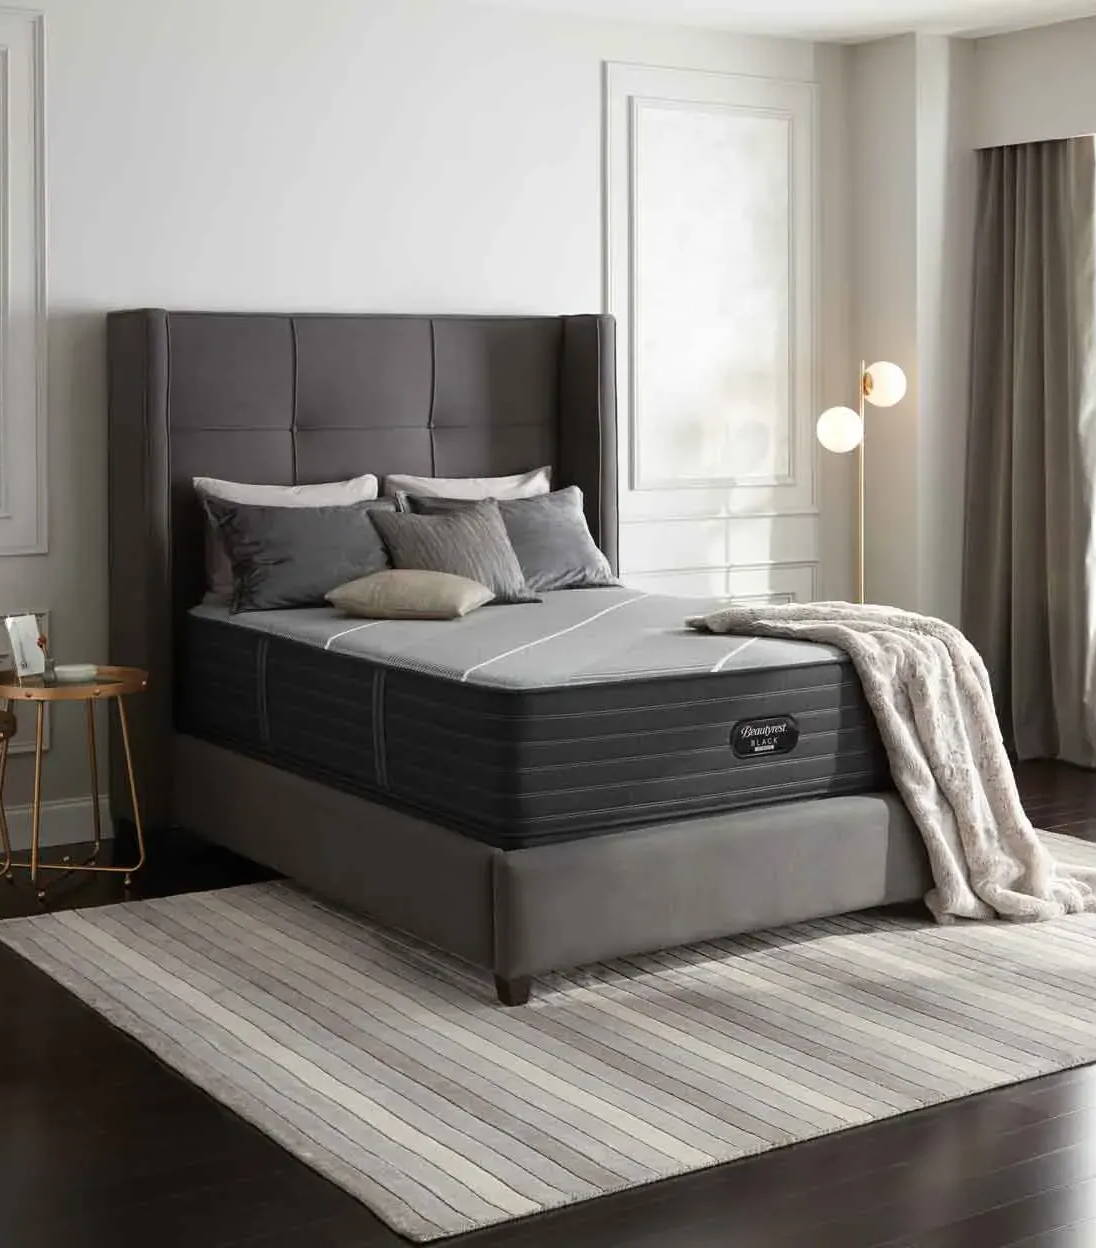 What Are The Pros & Cons Of Hybrid Mattresses For 2021?